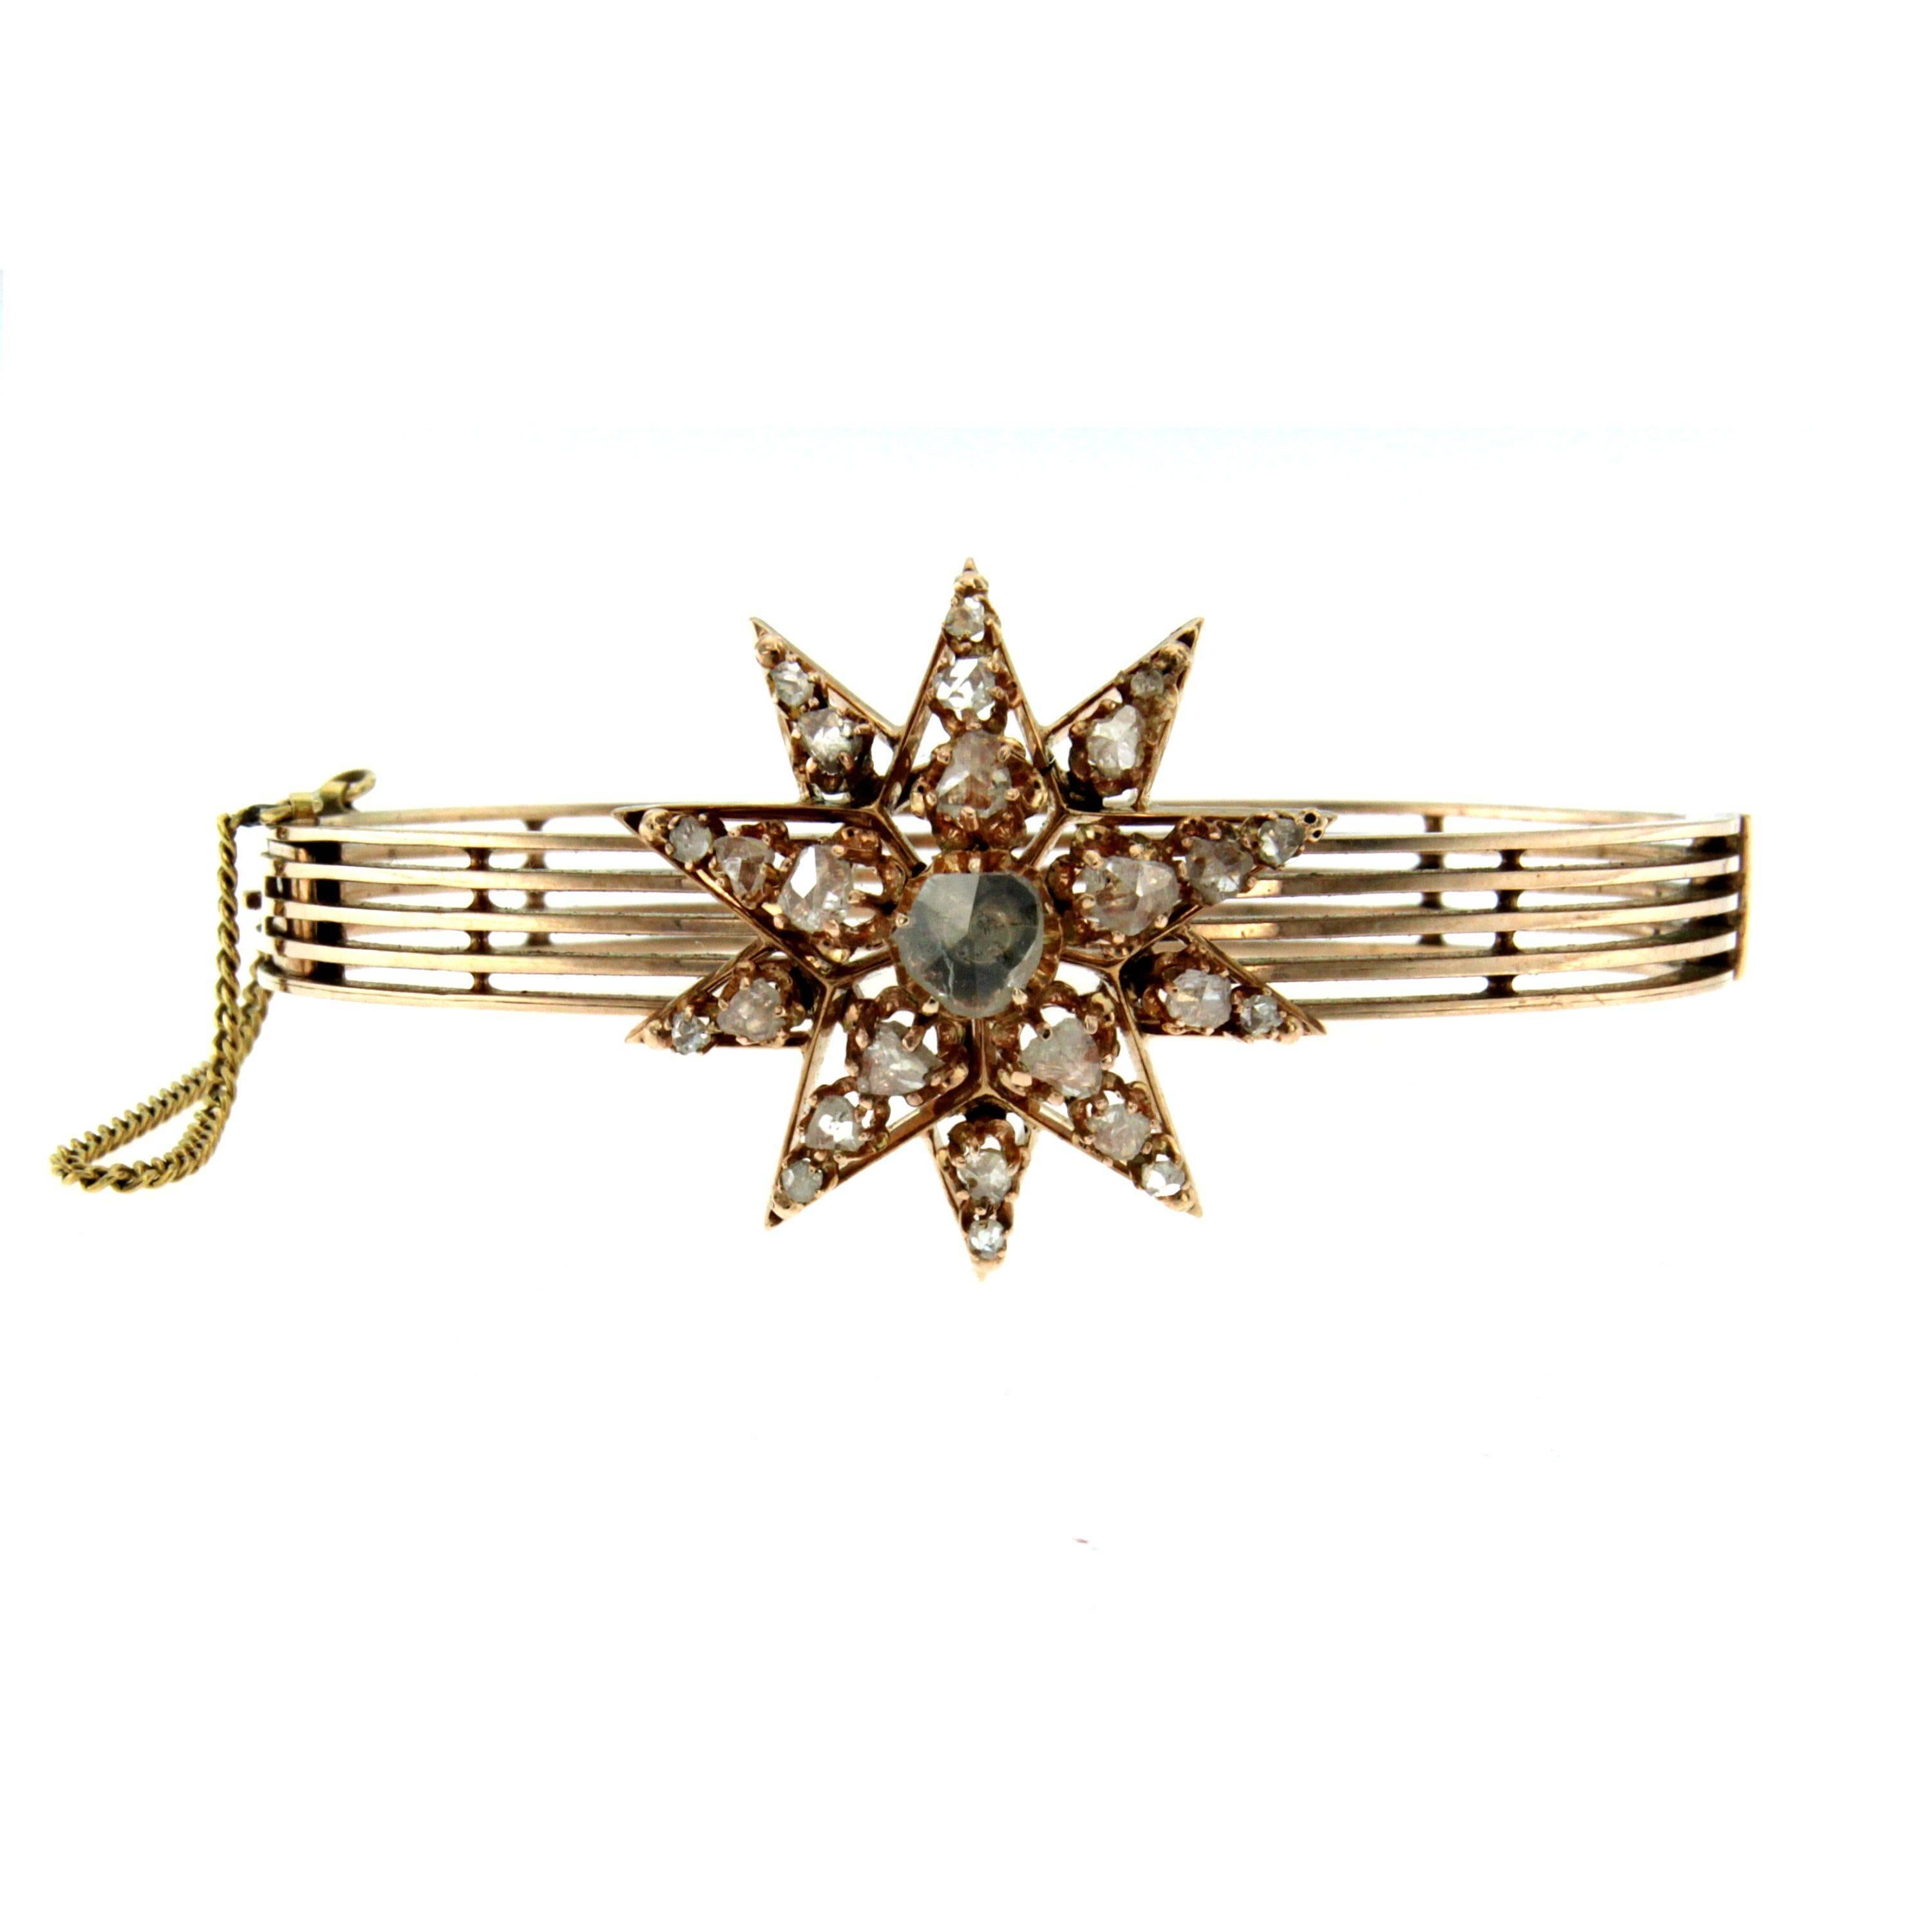 A gorgeous Victorian star design suite of earrings, bracelet and brooch  set with table-cut diamonds mounted in 12k Gold. Circa 1880

Estimated total diamond weight 3.50 cts:
Earrings: 0.70 total carats
Bracelet:1.30 total carats
Brooch: 1.50 total